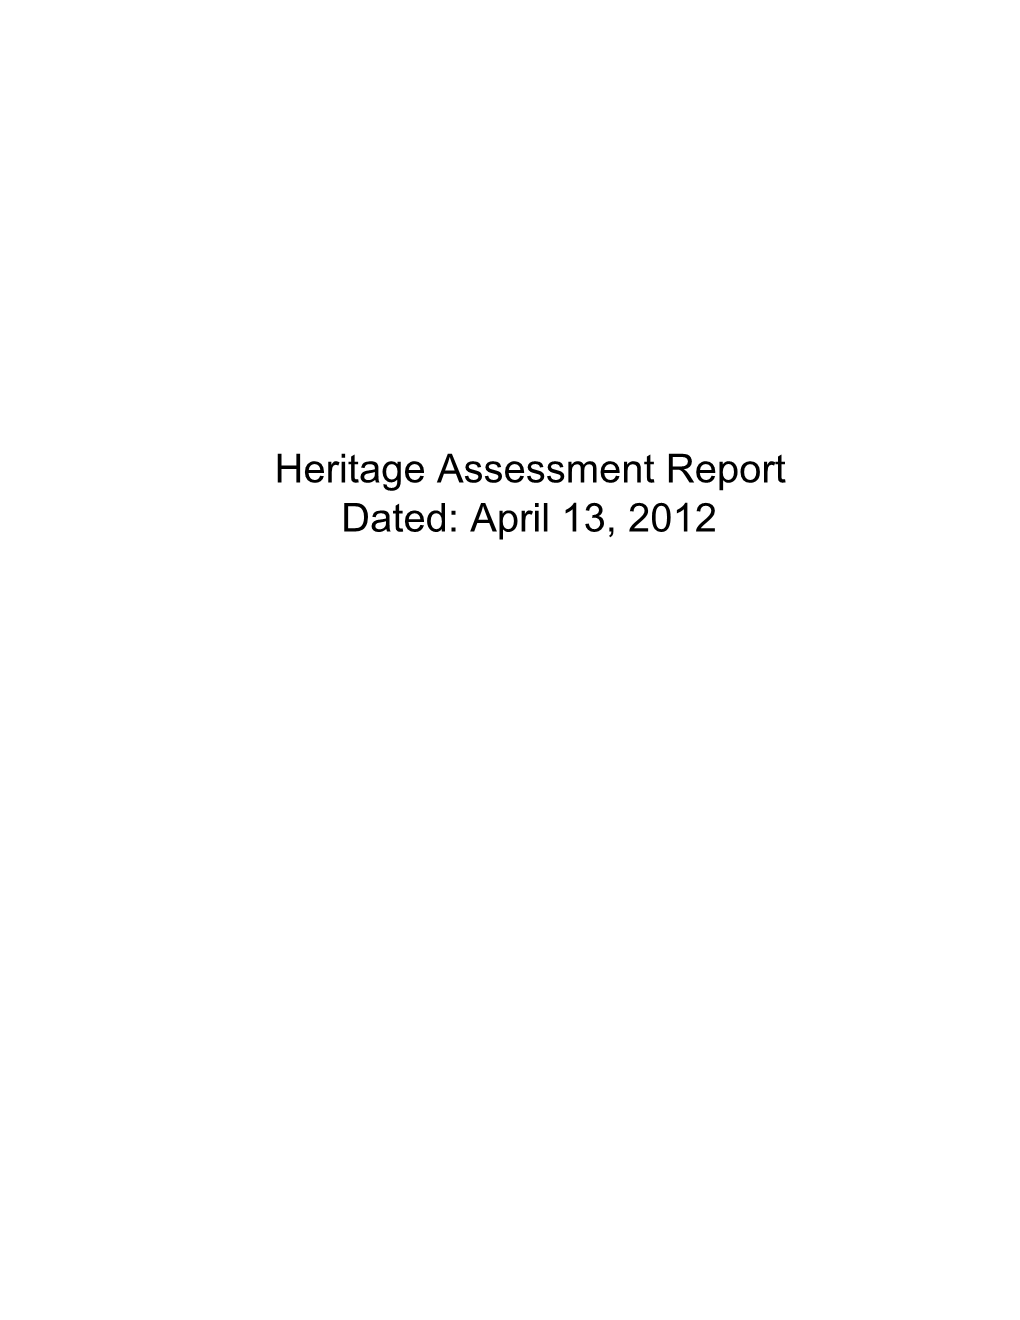 Heritage Assessment Report Dated: April 13, 2012